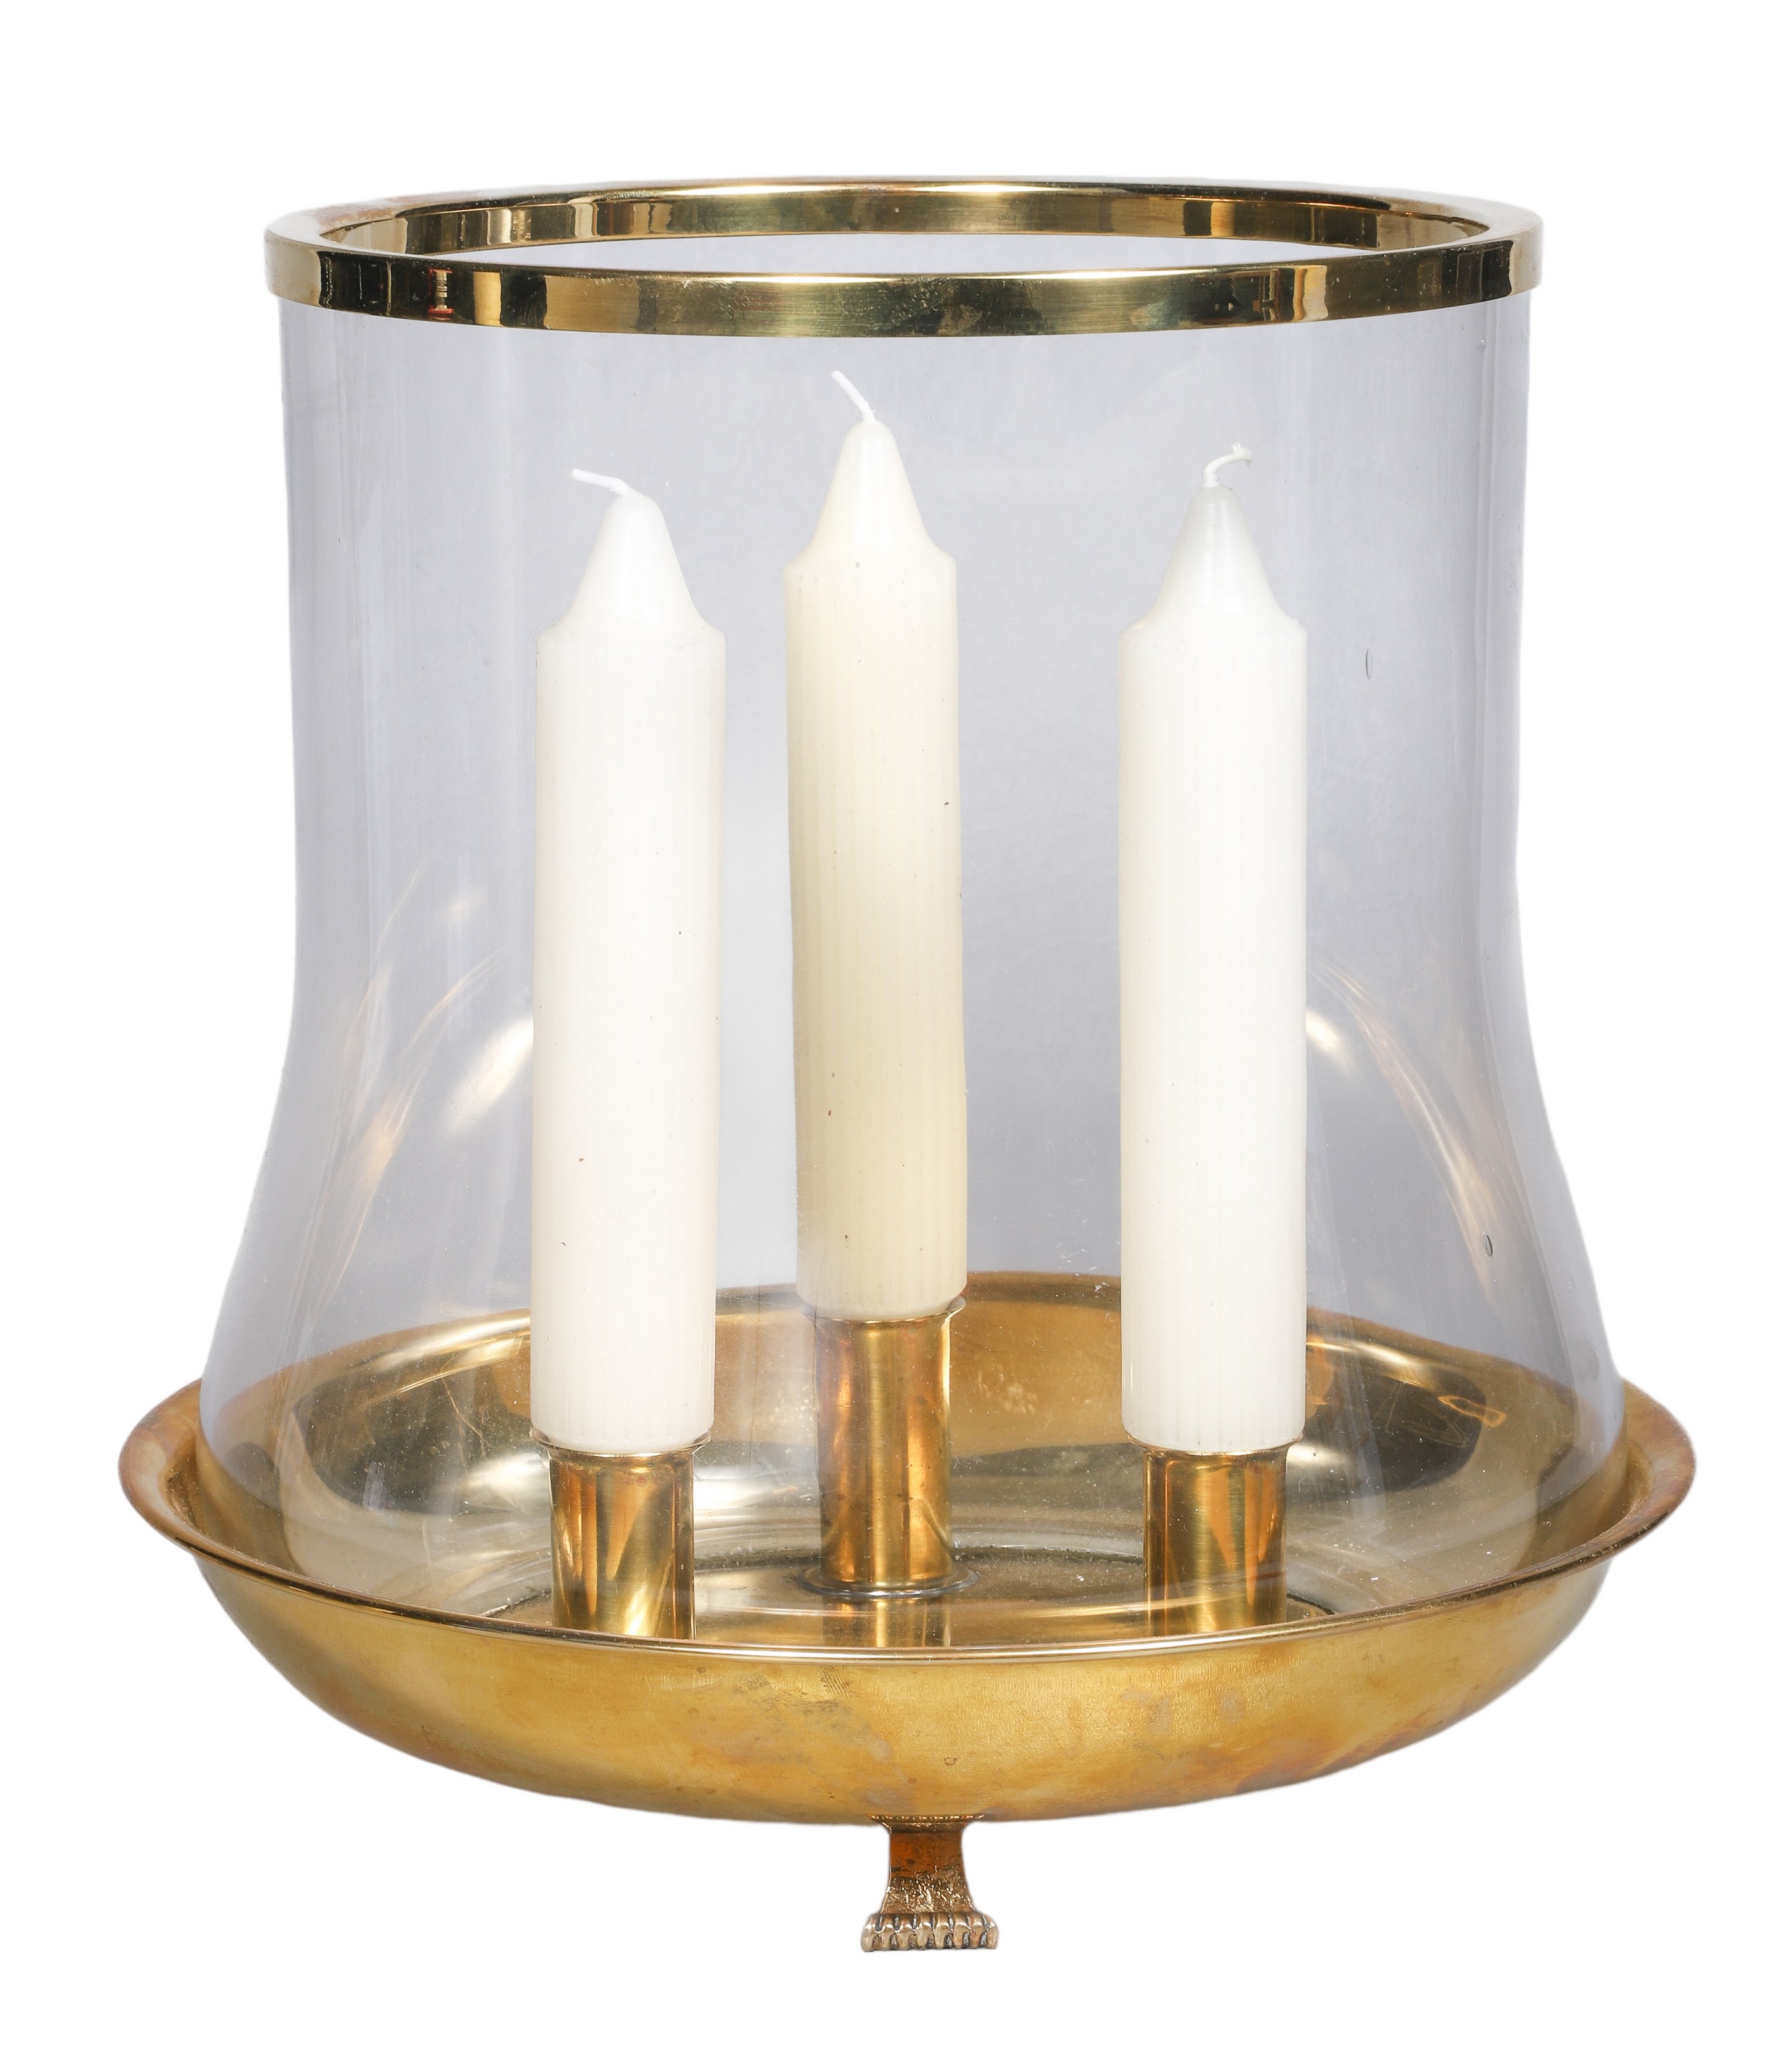 Valenti brass 3 candle holder with 2e118d